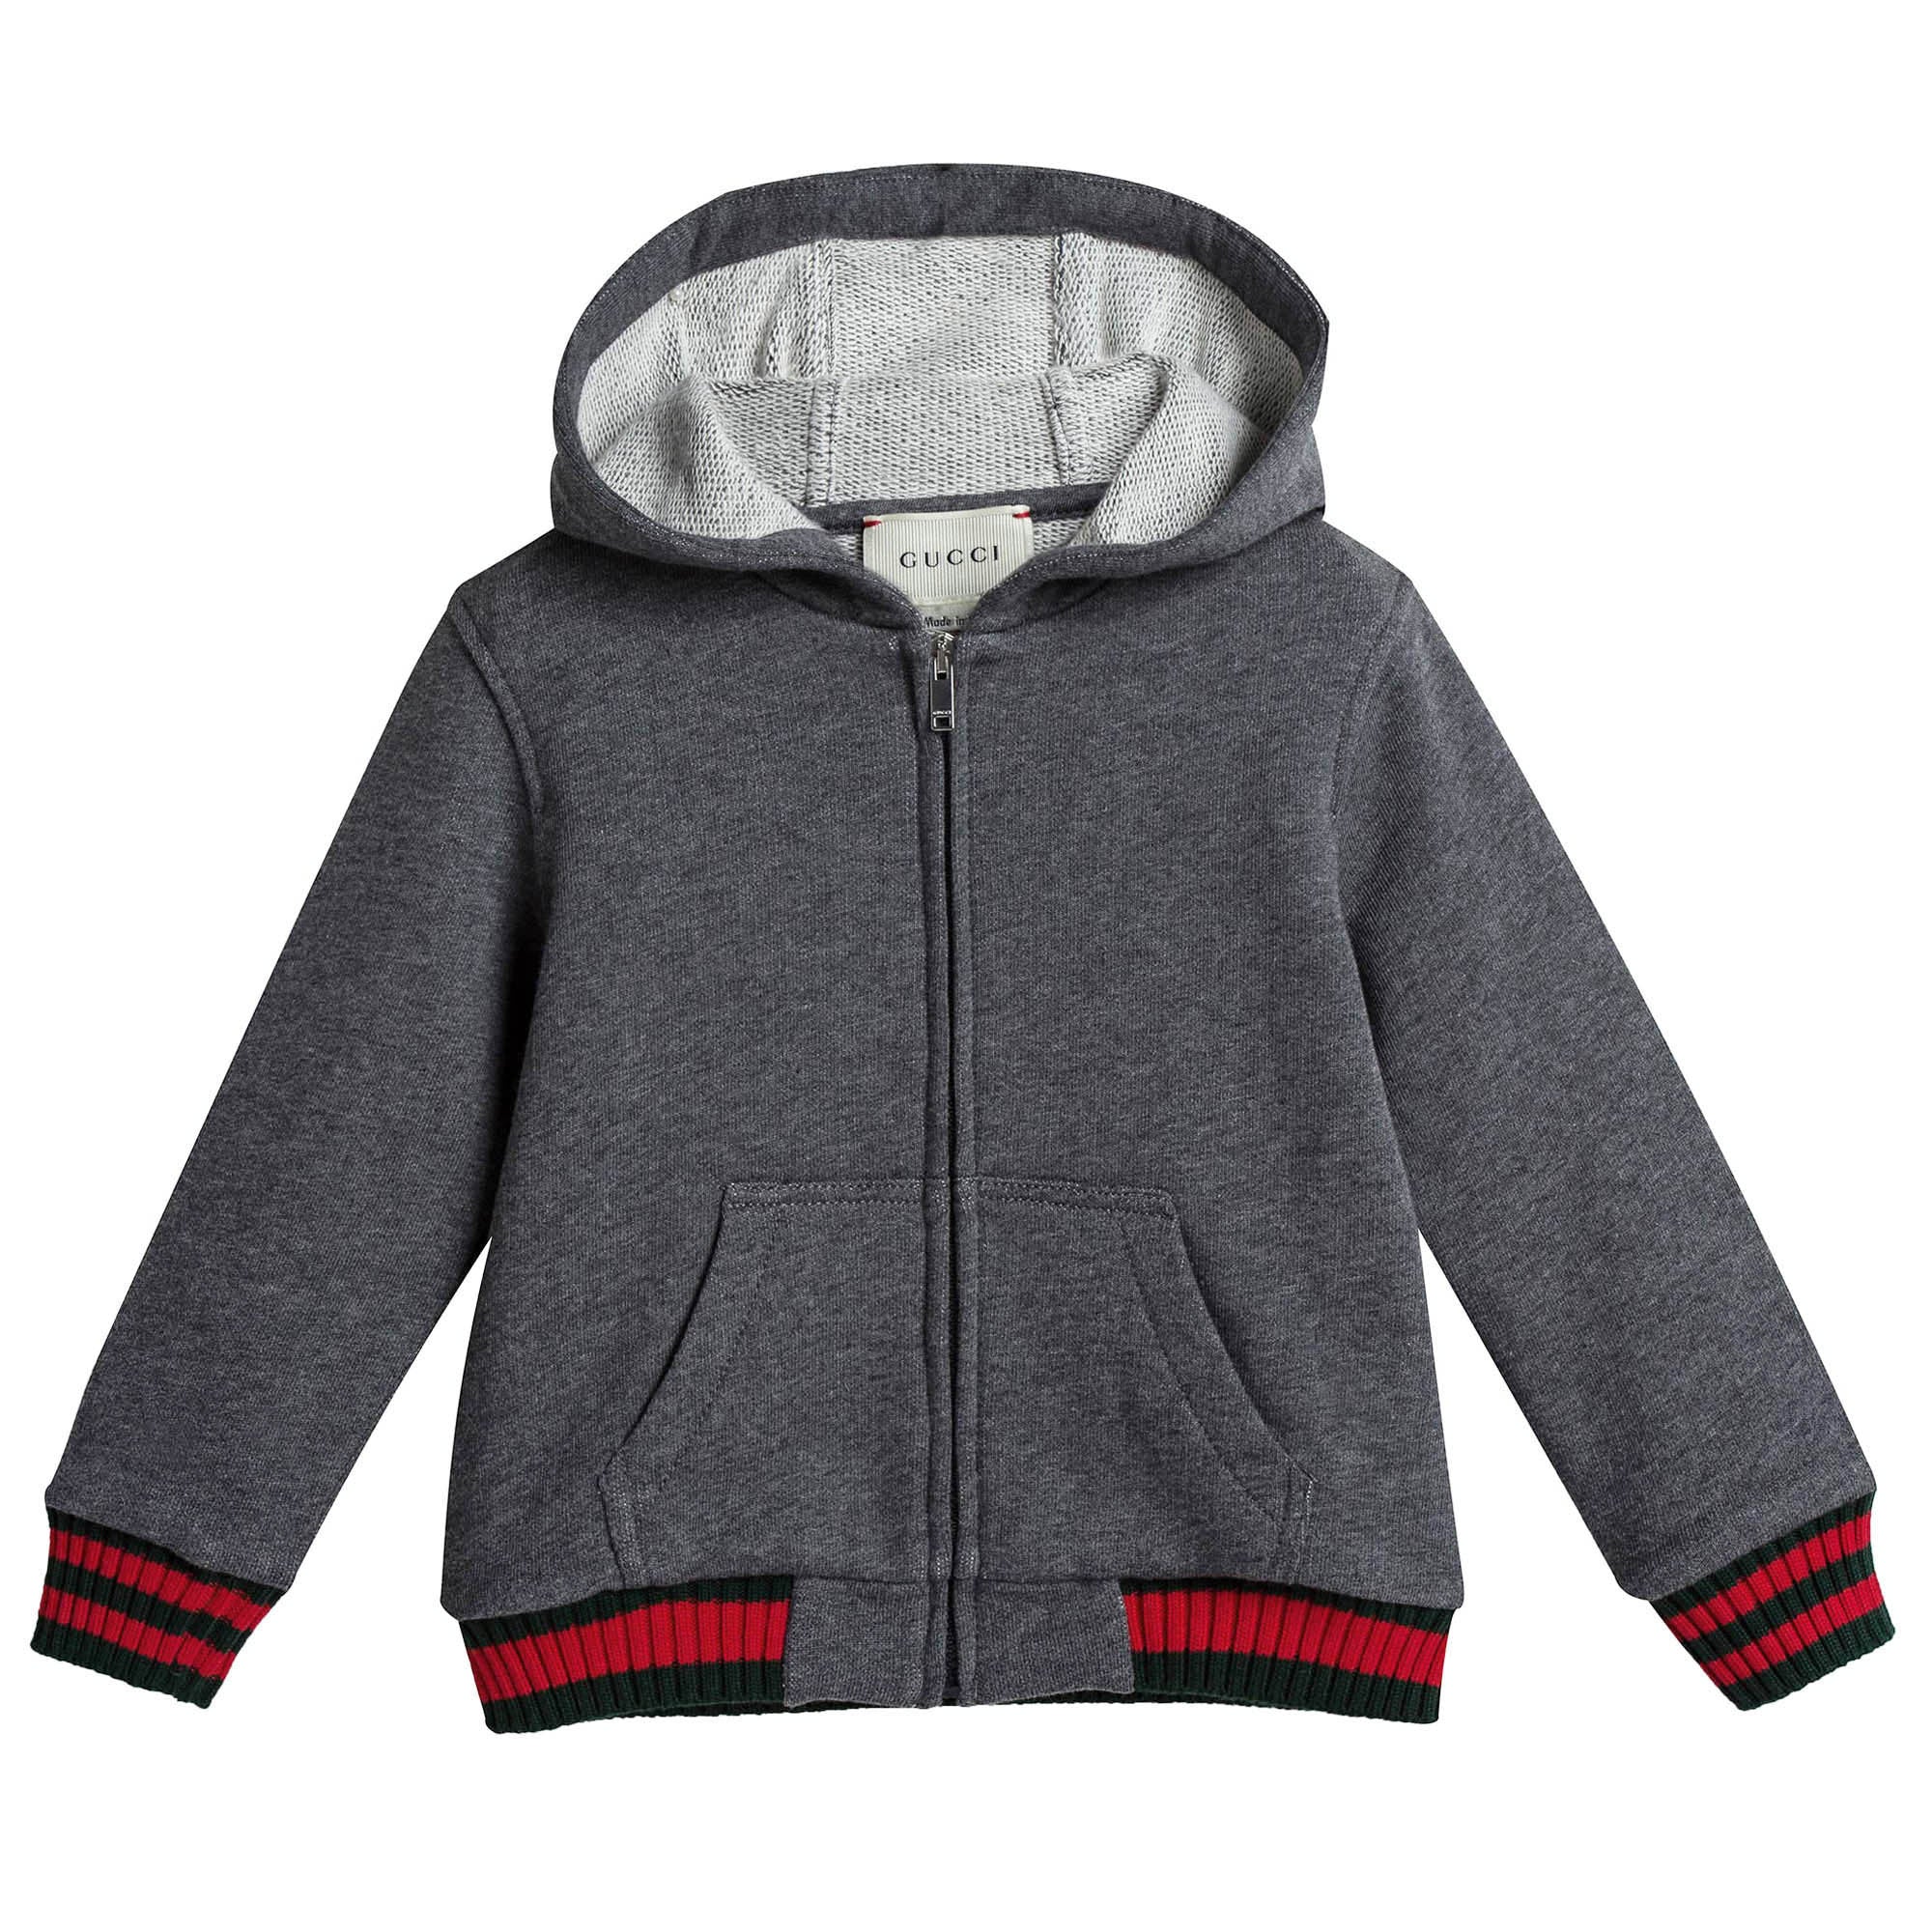 Baby Boys Grey Hooded Ribbed Cuffs Cotton Zip-Up Top - CÉMAROSE | Children's Fashion Store - 1